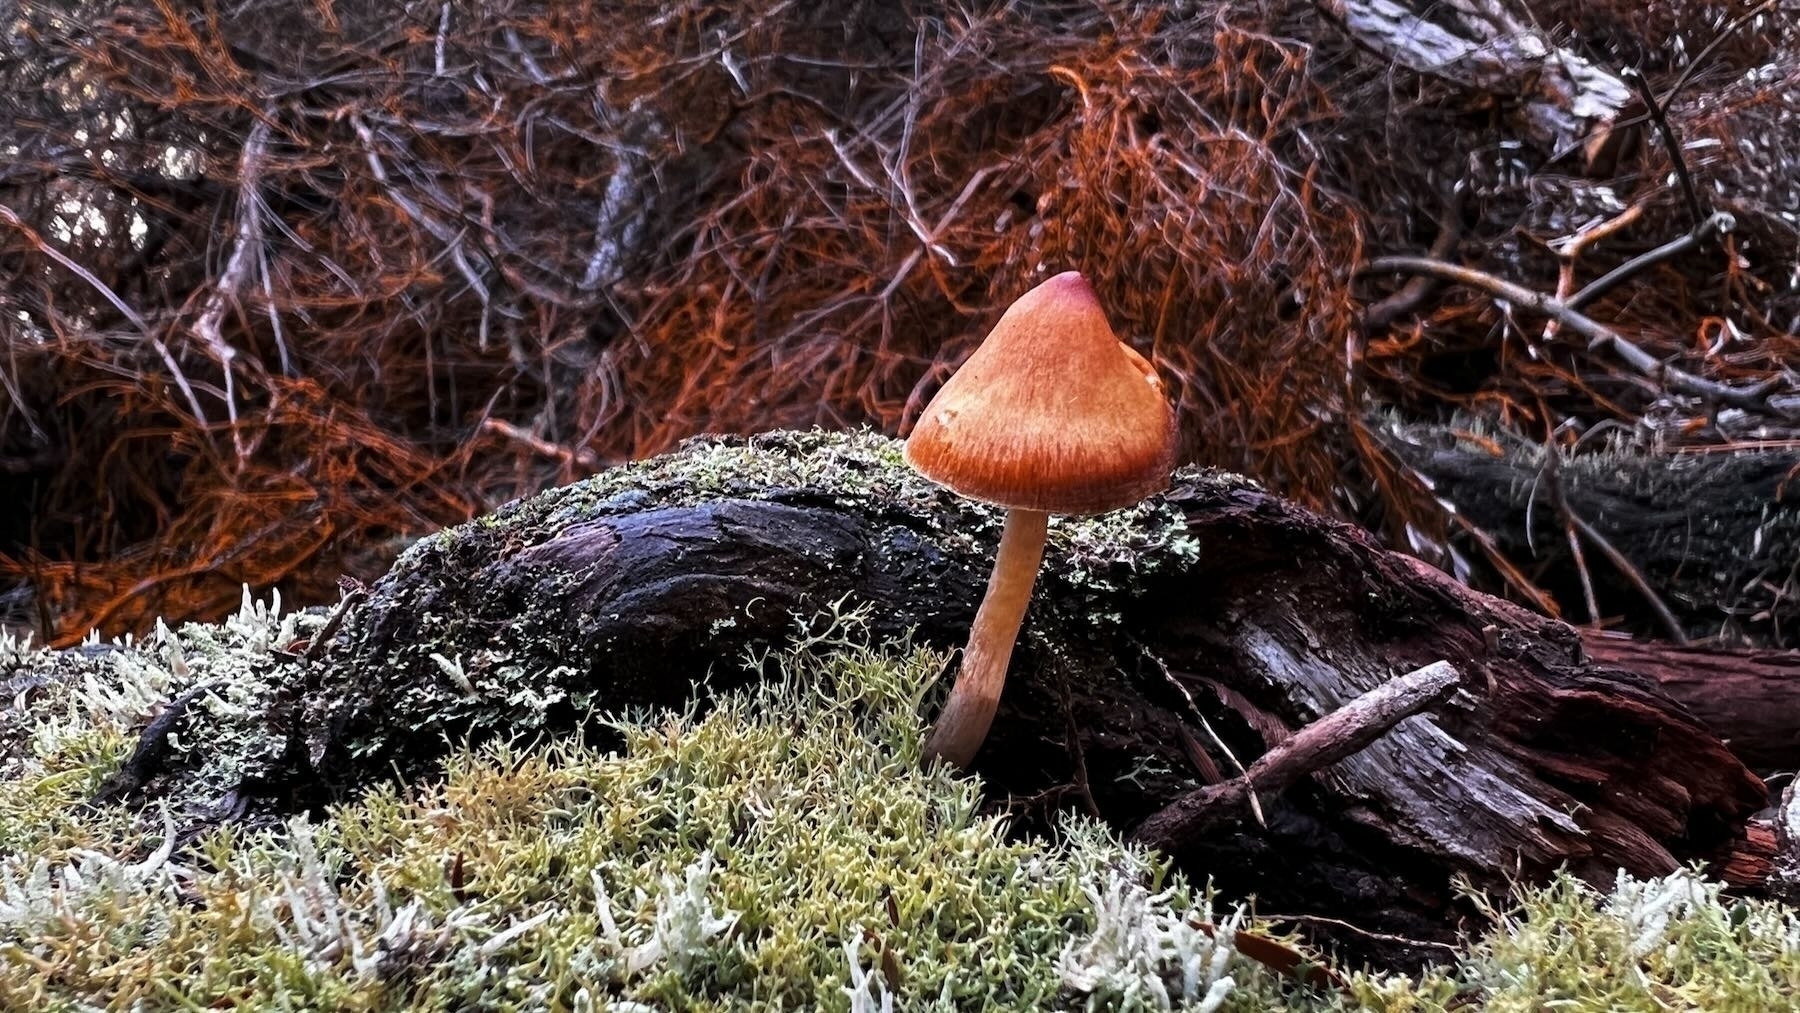 A chestnut coloured fungus on a decaying log, with lichen or moss below.